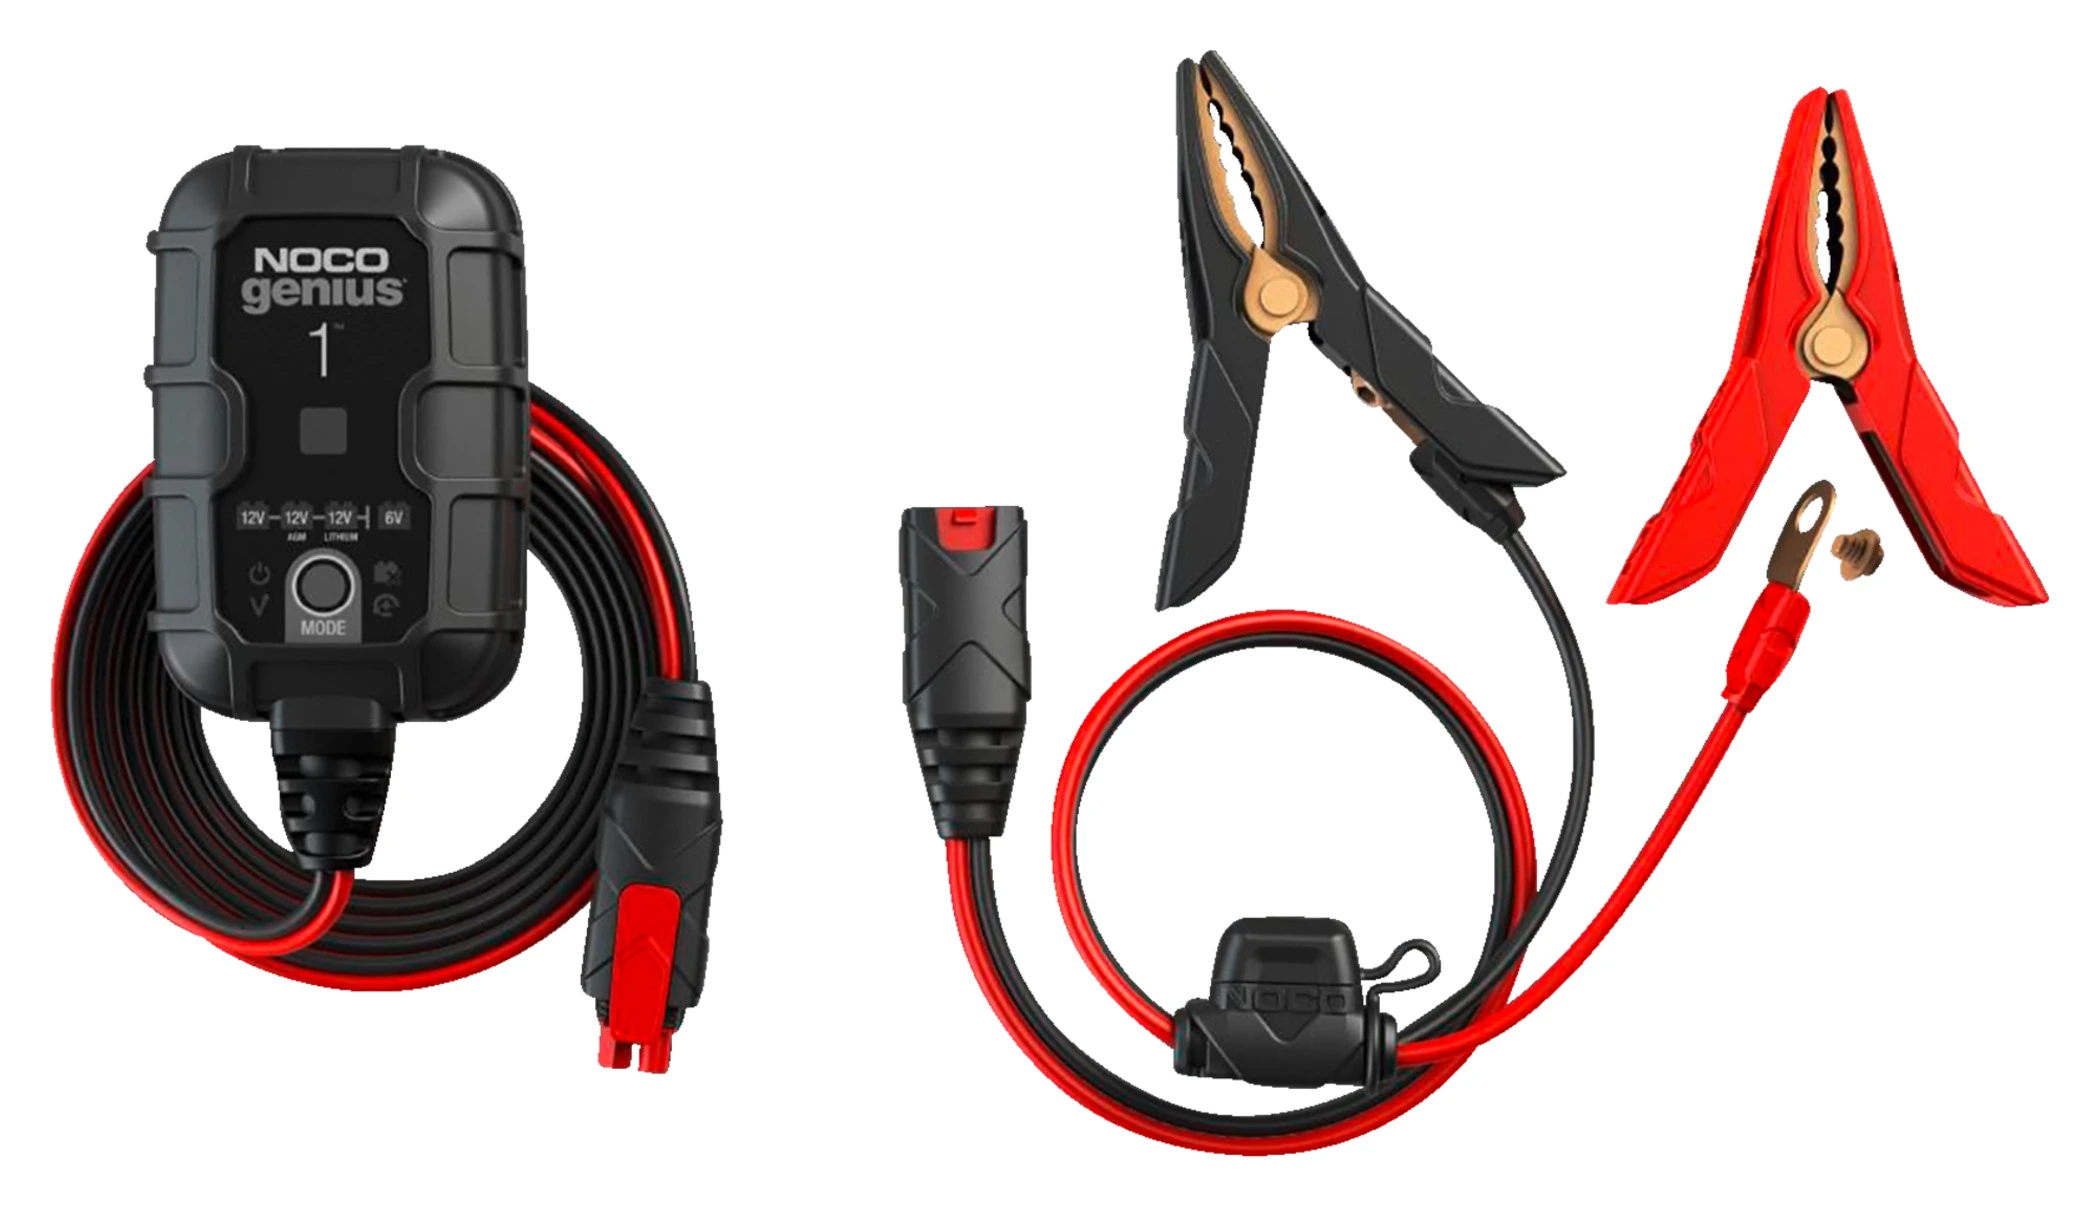 NOCO Genius 1 Genius Series 1A 6-volt/12-volt battery charger and  maintainer at Crutchfield